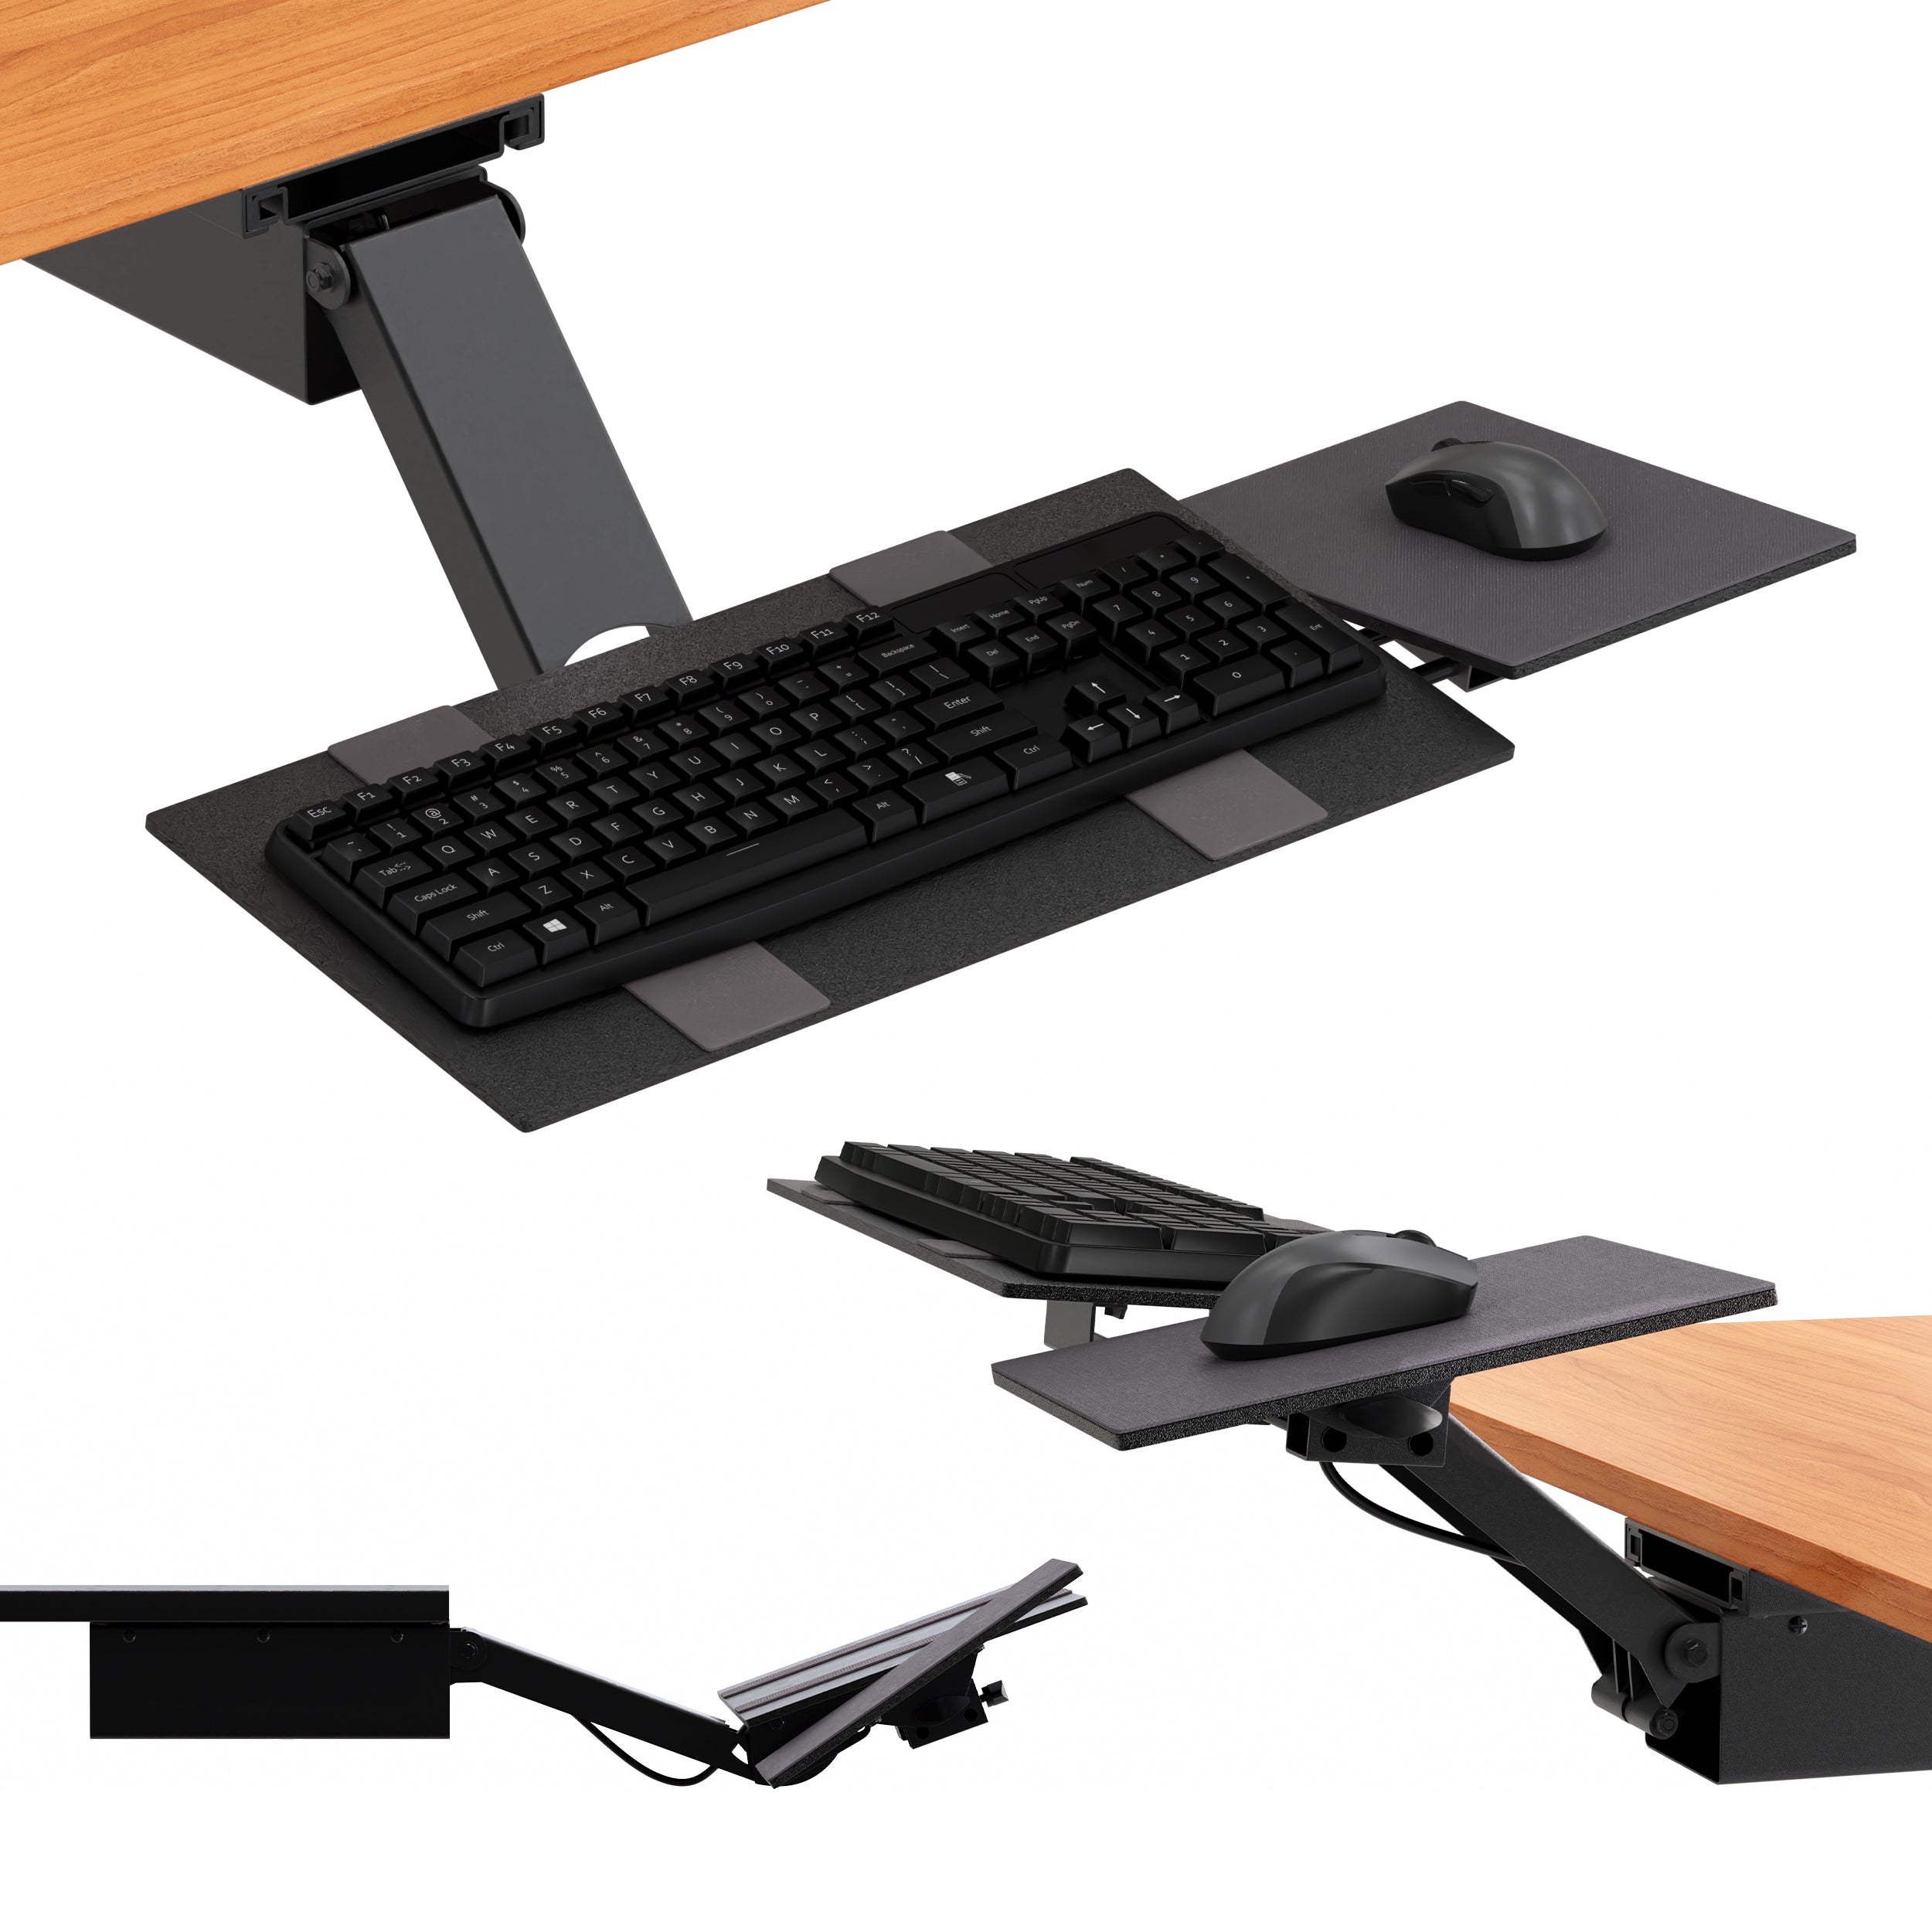 This $130 Electric Standing Desk From  Is Perfect for Back